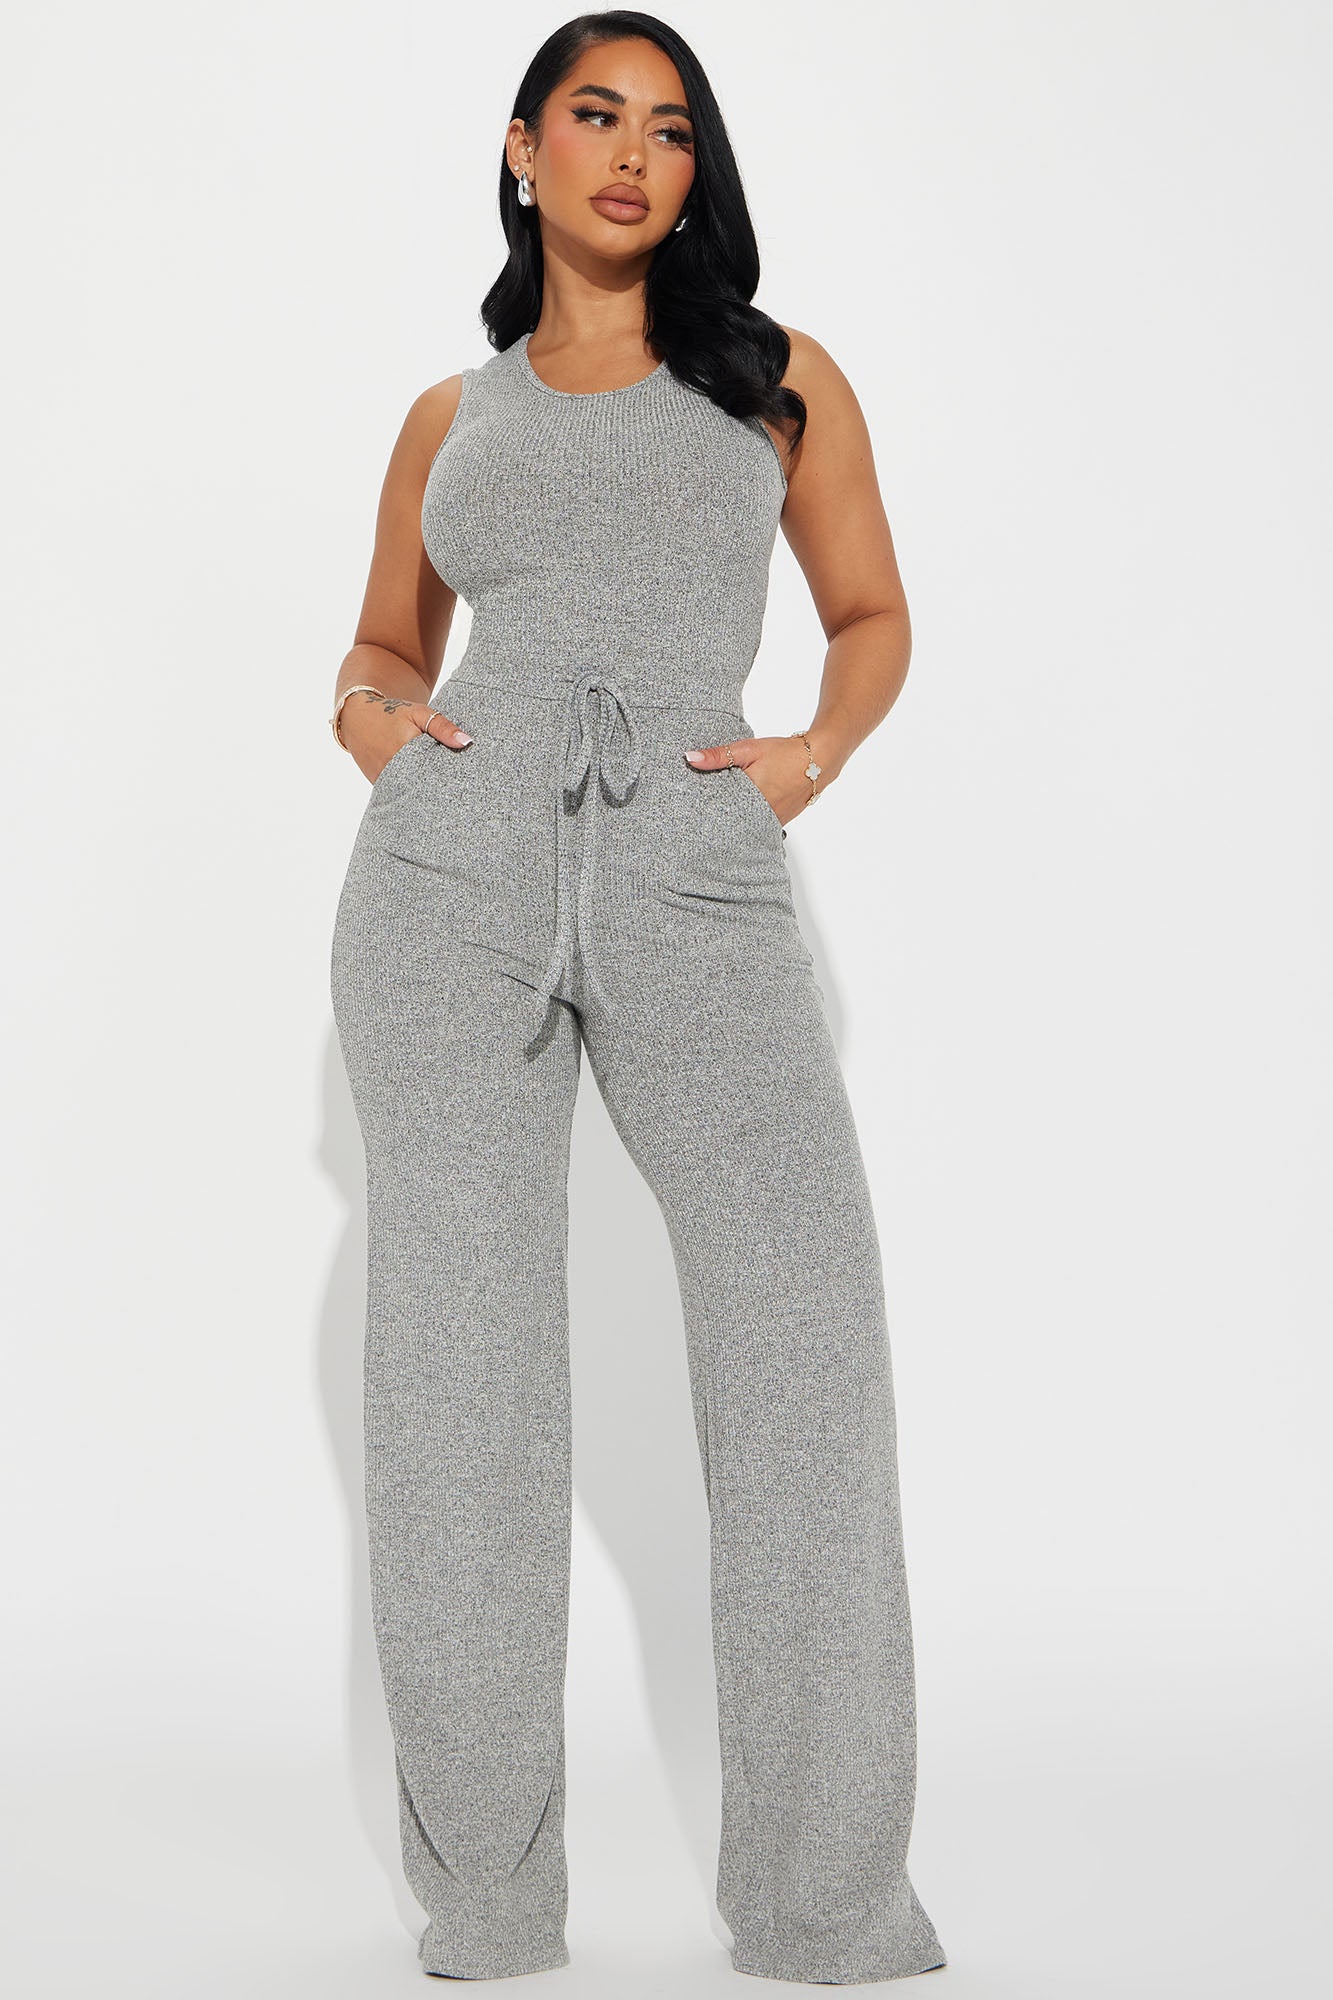 Express Your Style Jumpsuit - Heather Grey